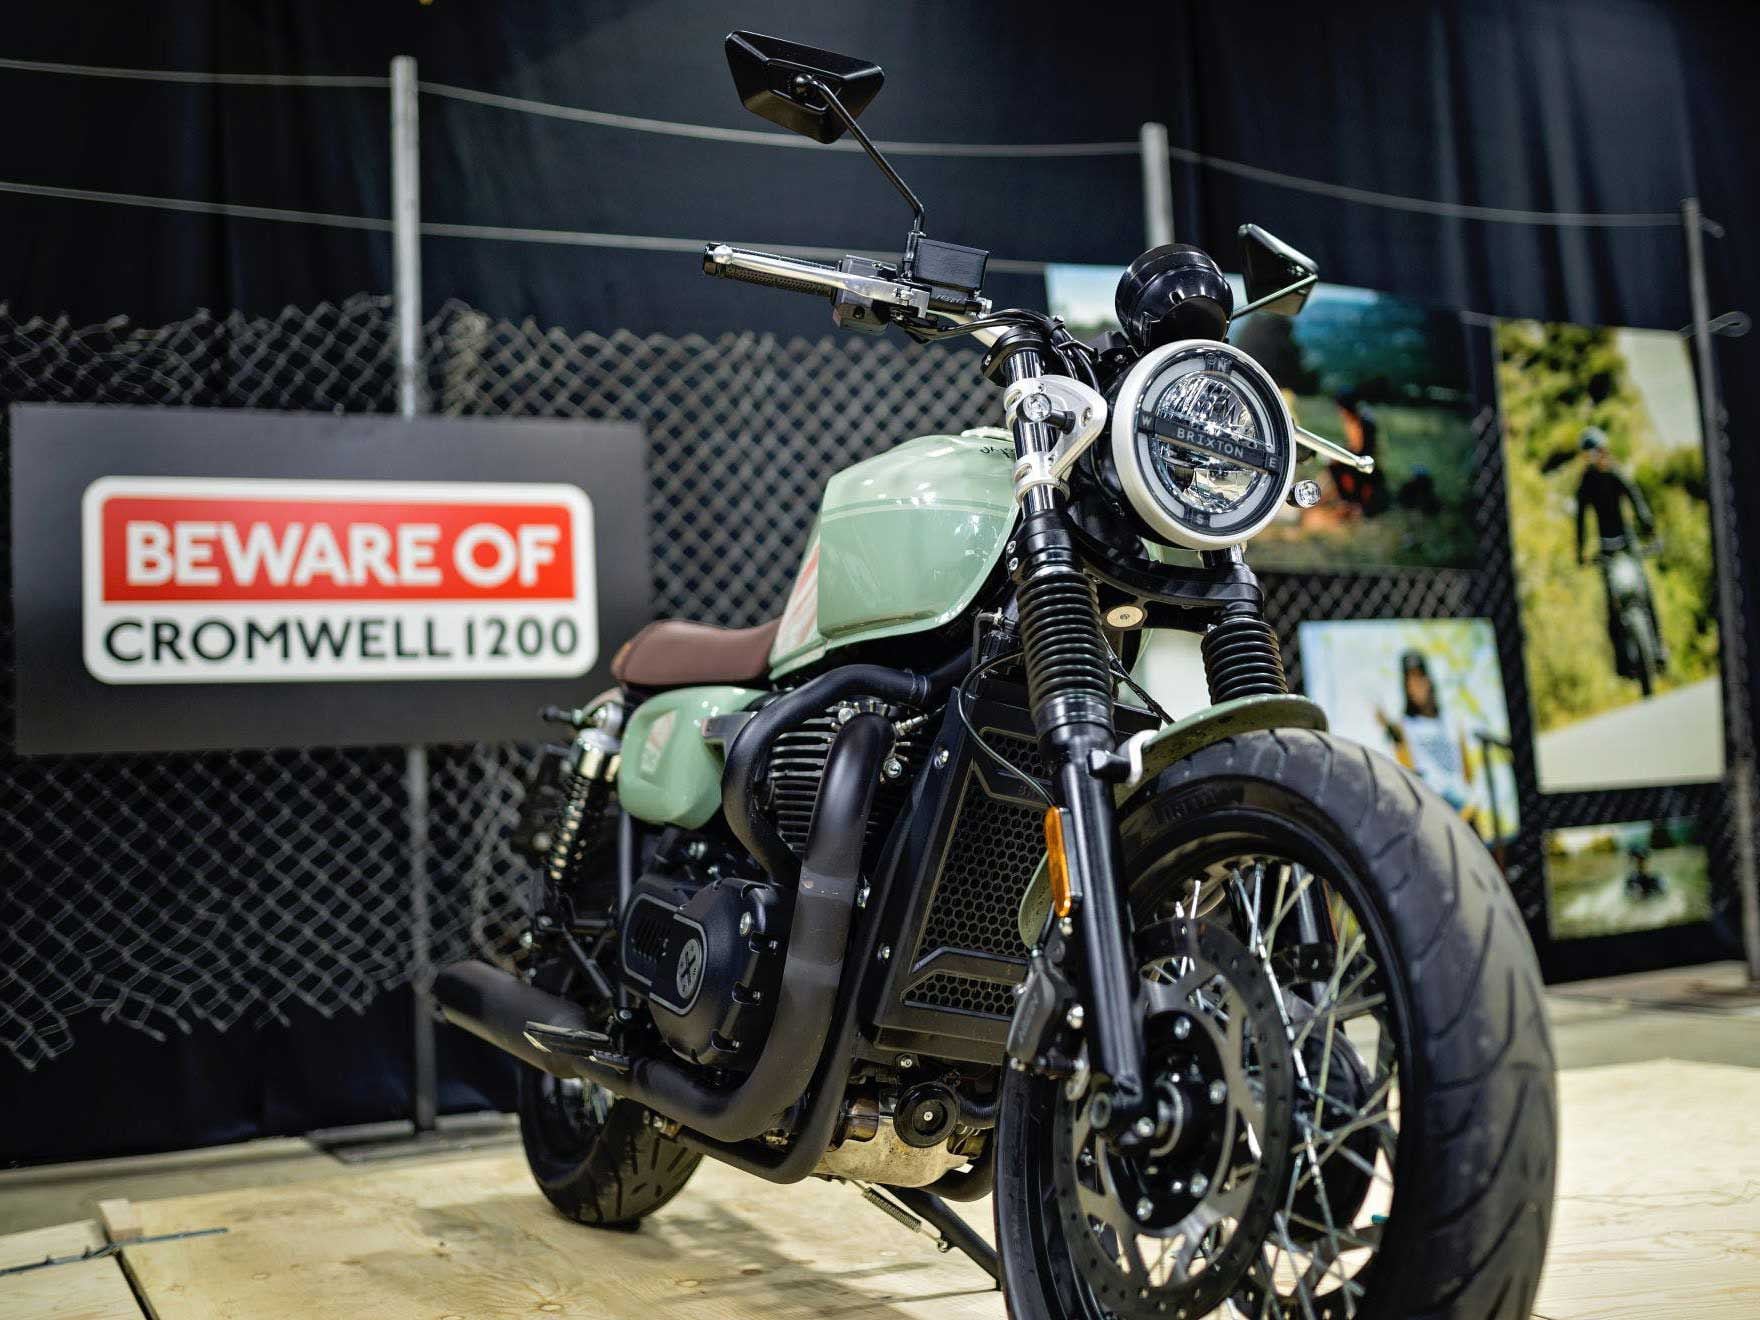 Bonneville-inspired? Whatever the term, there’s no question the Cromwell shares a good deal with the Triumph, from outward dimensions and styling to engine layout to outright performance numbers.